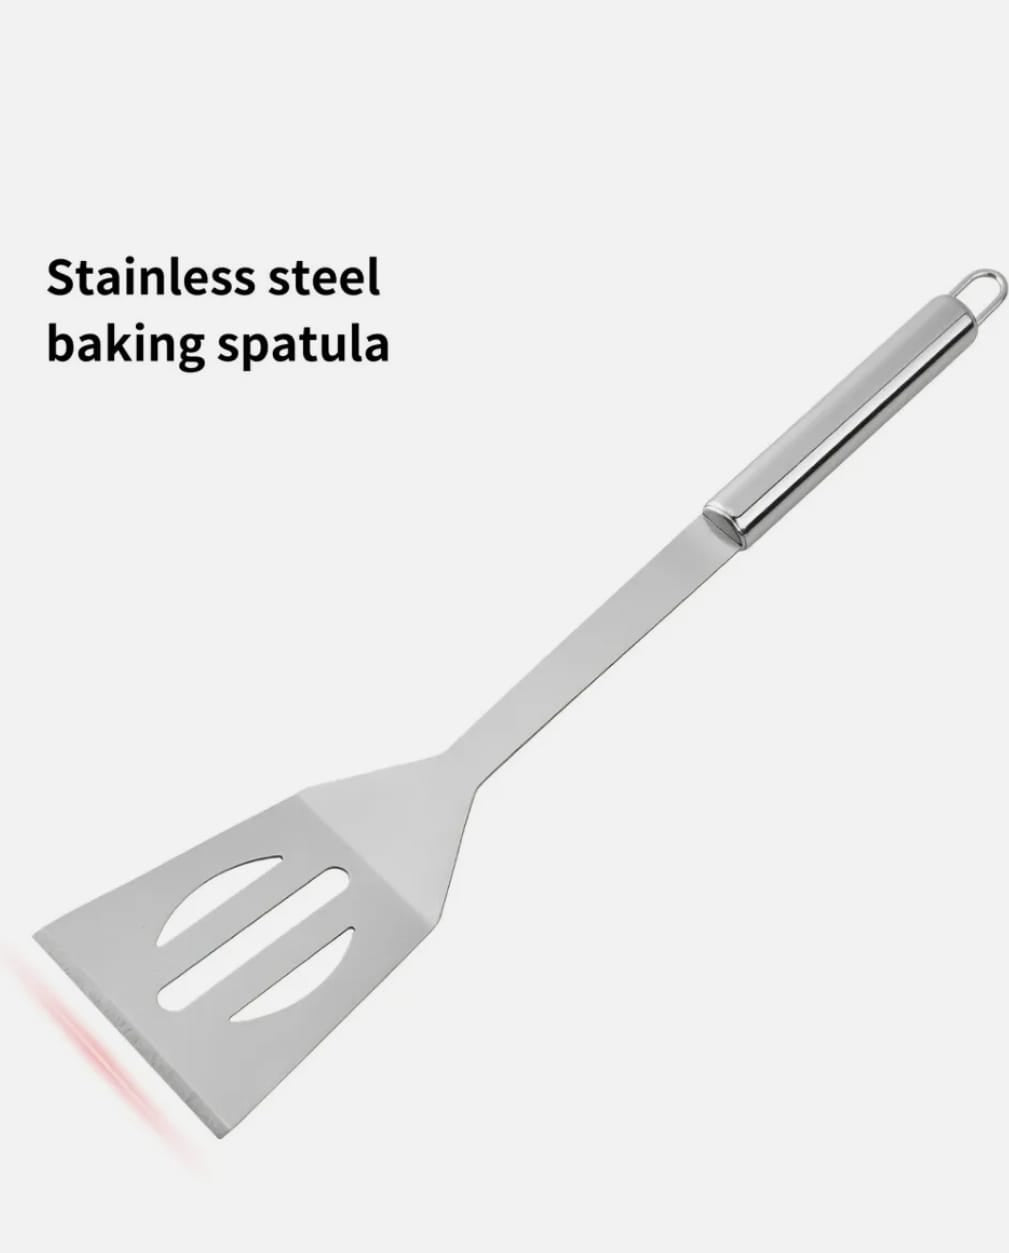 Stainless Steel BBQ Grill Utensils